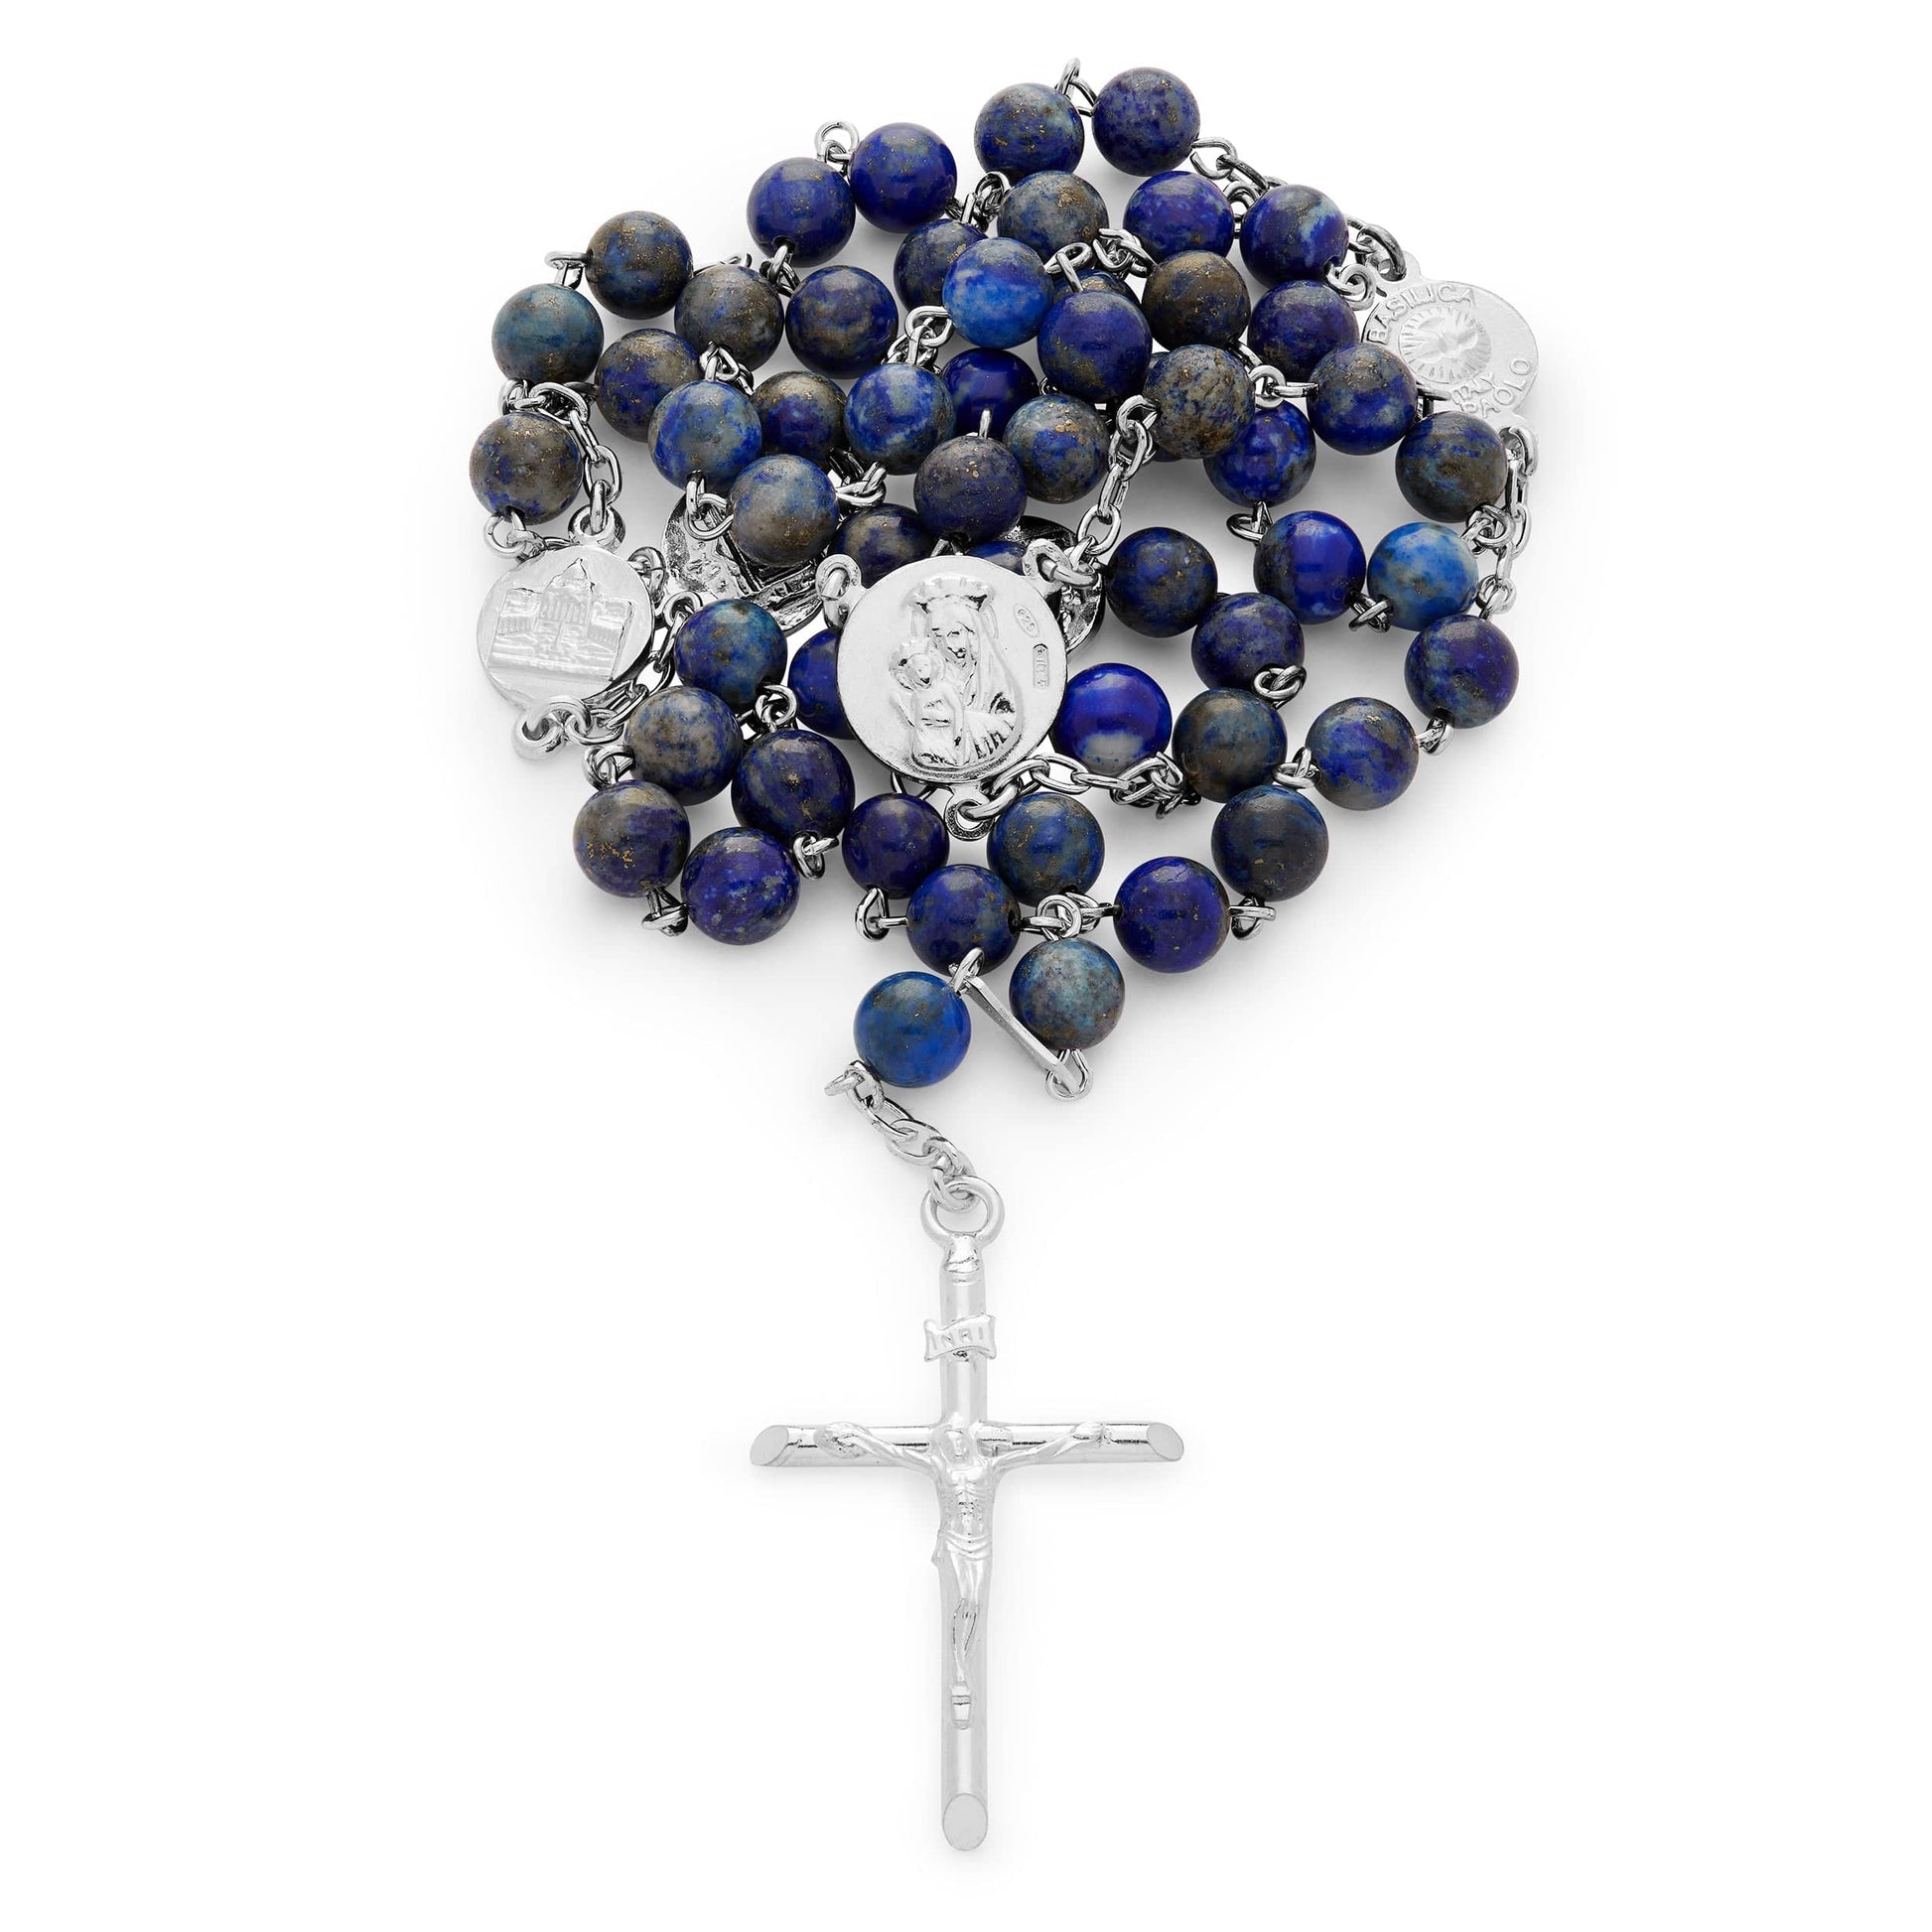 MONDO CATTOLICO Prayer Beads 51 Cm (20.07 in) / 6 mm (0.23 in) Sterling Silver Lapis Lazuli Rosary